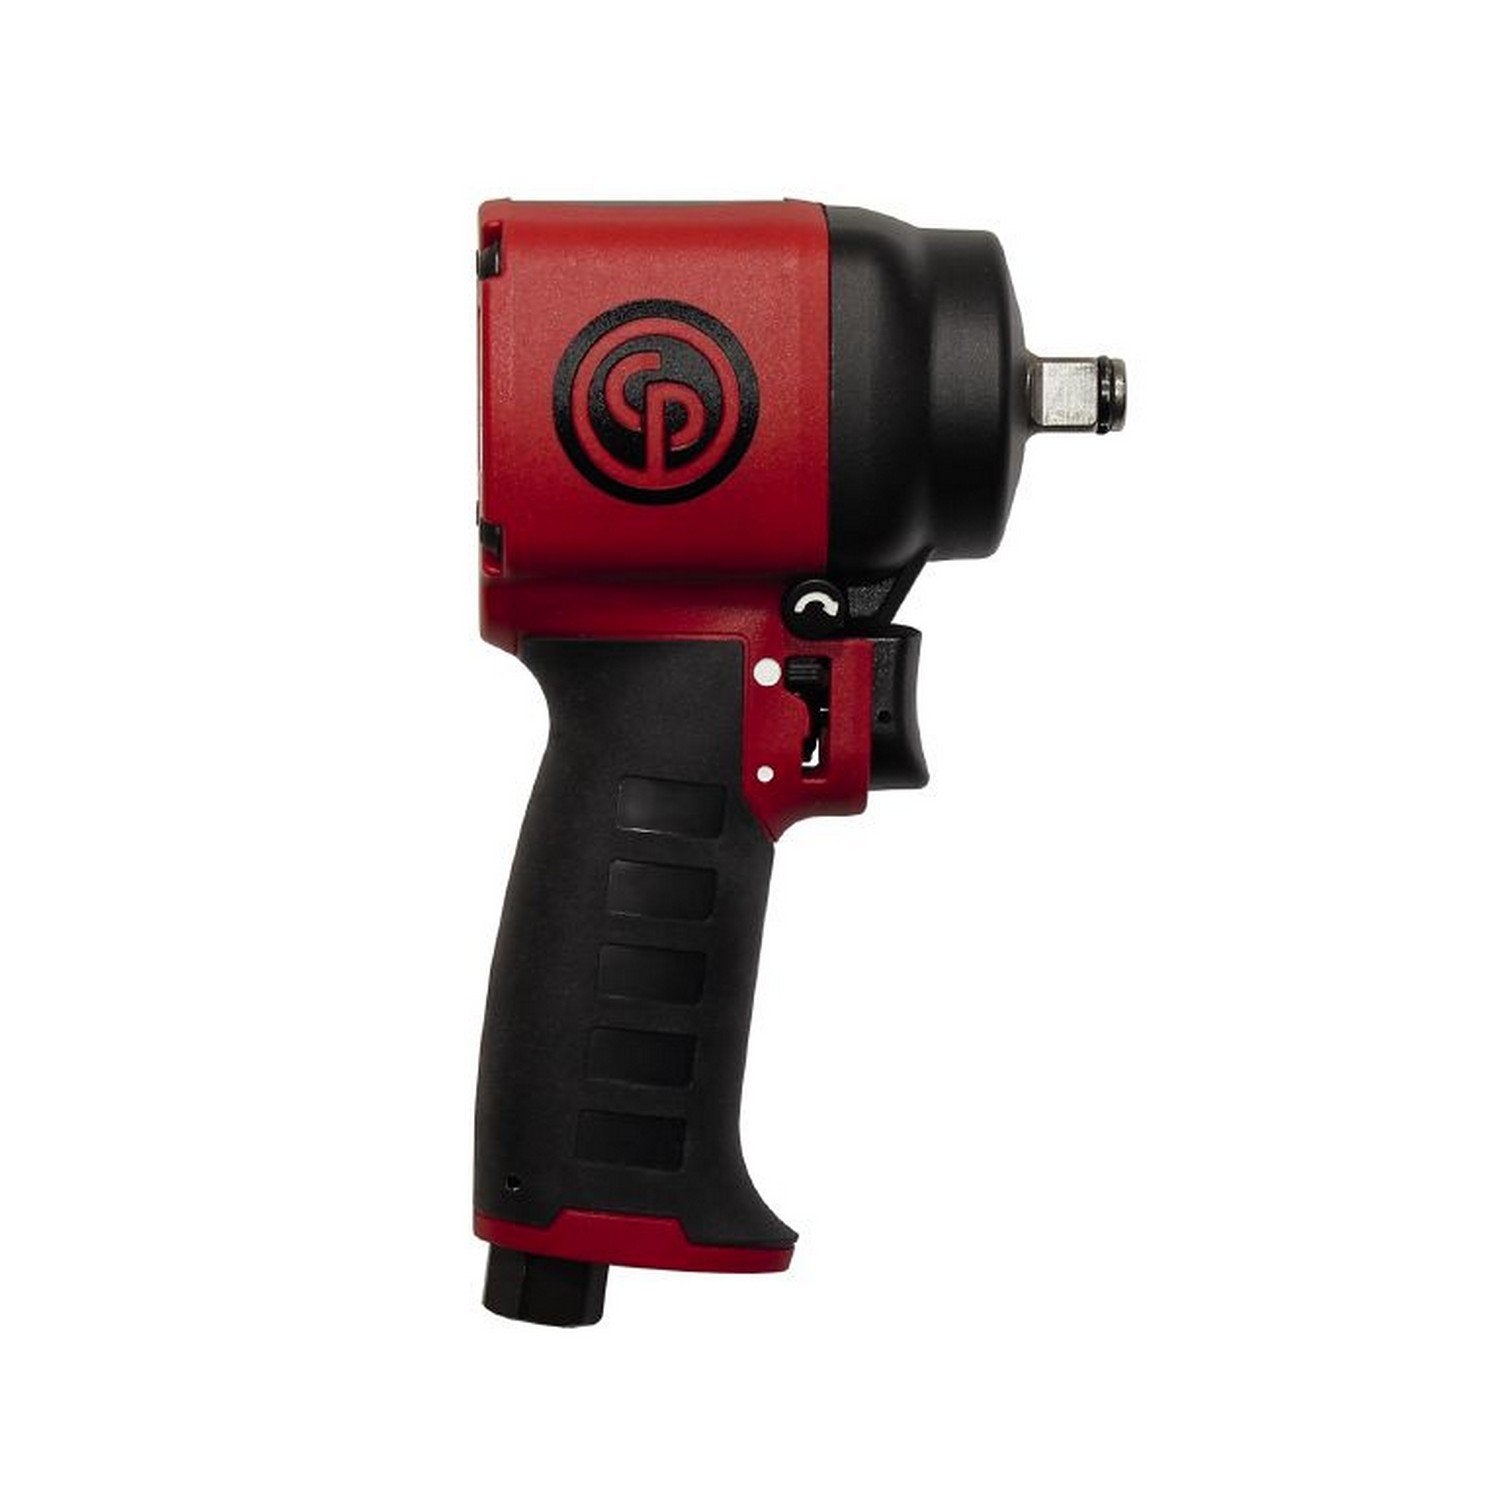 Chicago Pneumatic. CP7732C. Air Impact Wrench. 1/2 in Drive - MPR Tools & Equipment